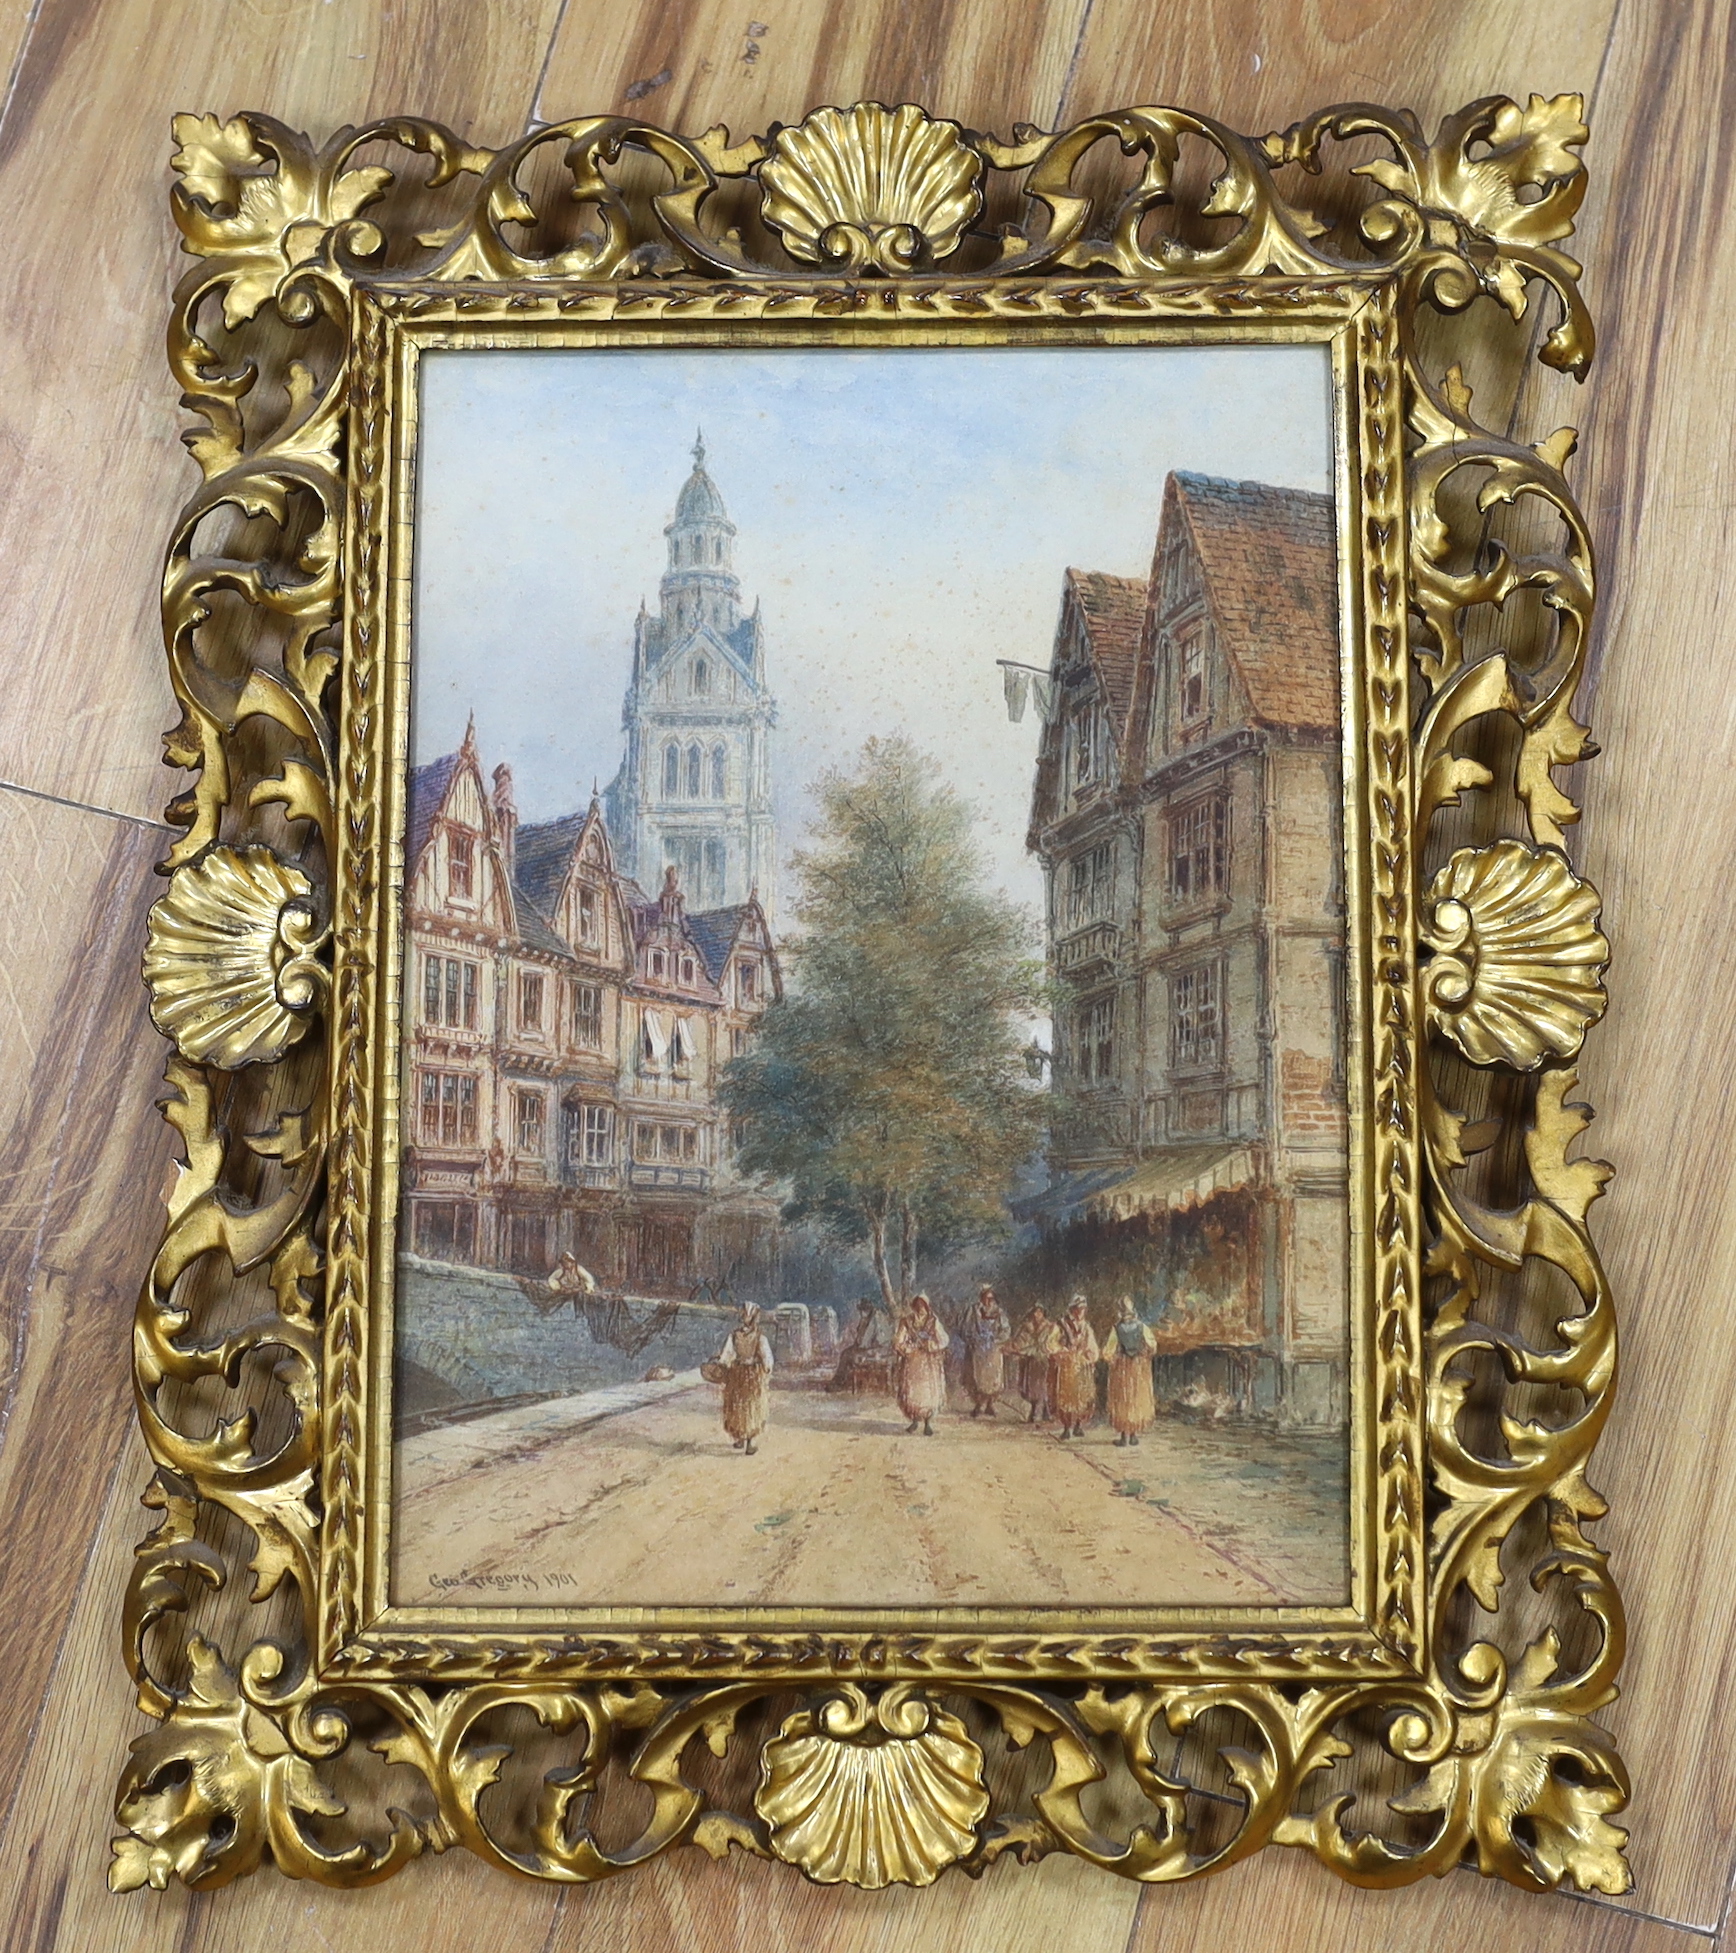 George Gregory (1849-1938), watercolour, Street scene with figures, signed and dated 1901, 36 x 27cm, housed in a Florentine gilt frame